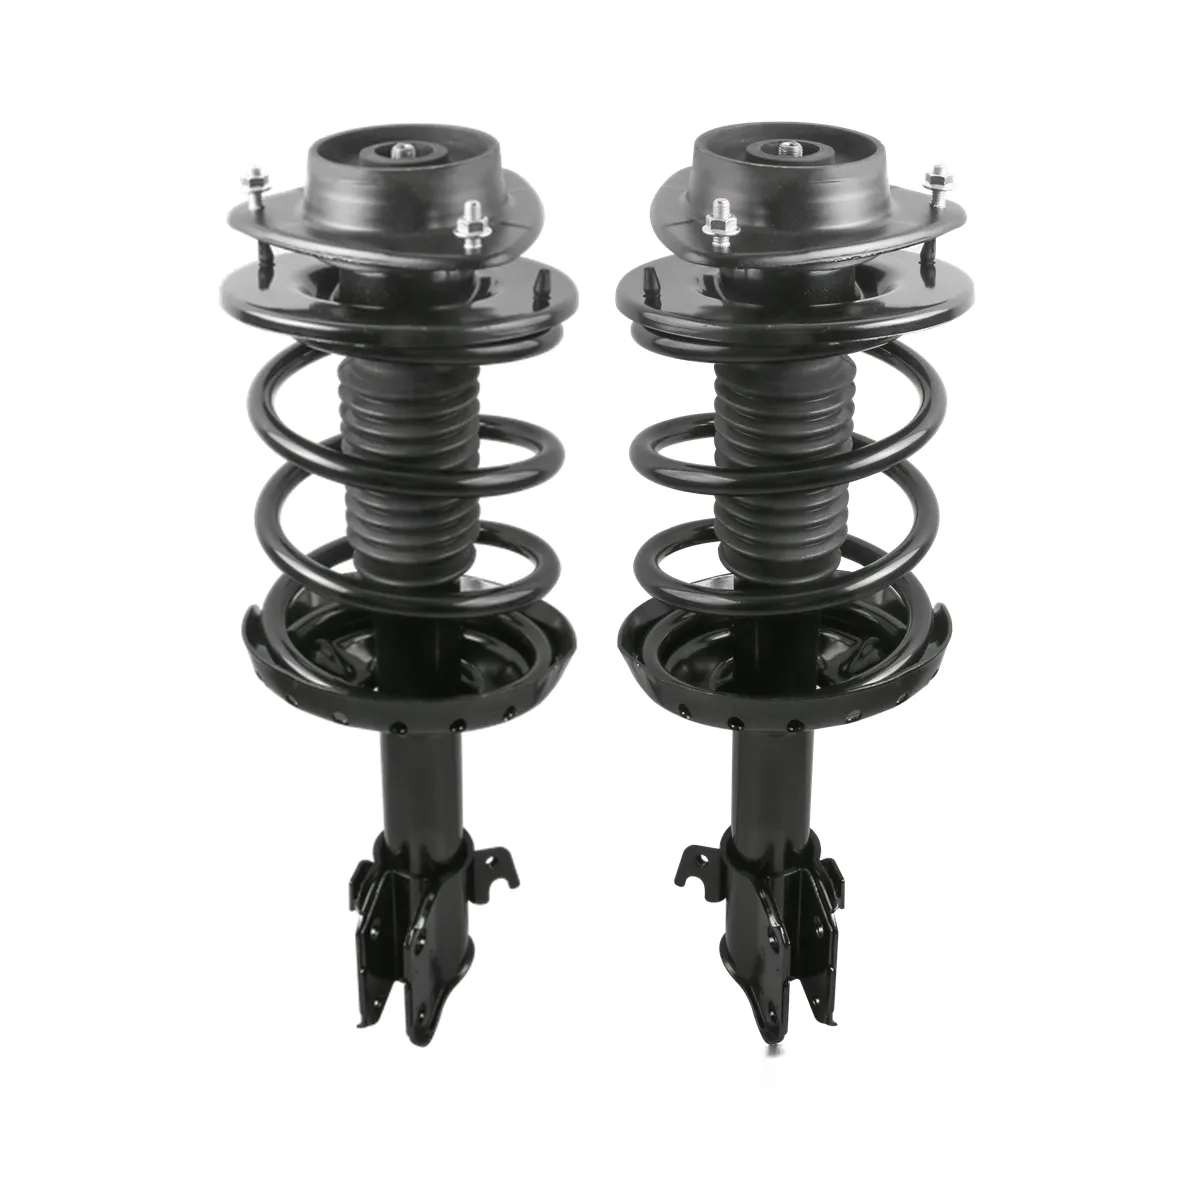 2x Front Complete Struts & Coil Spring Assembly For 2005-2009 Subaru Legacy 2.5L 3.0L AWD